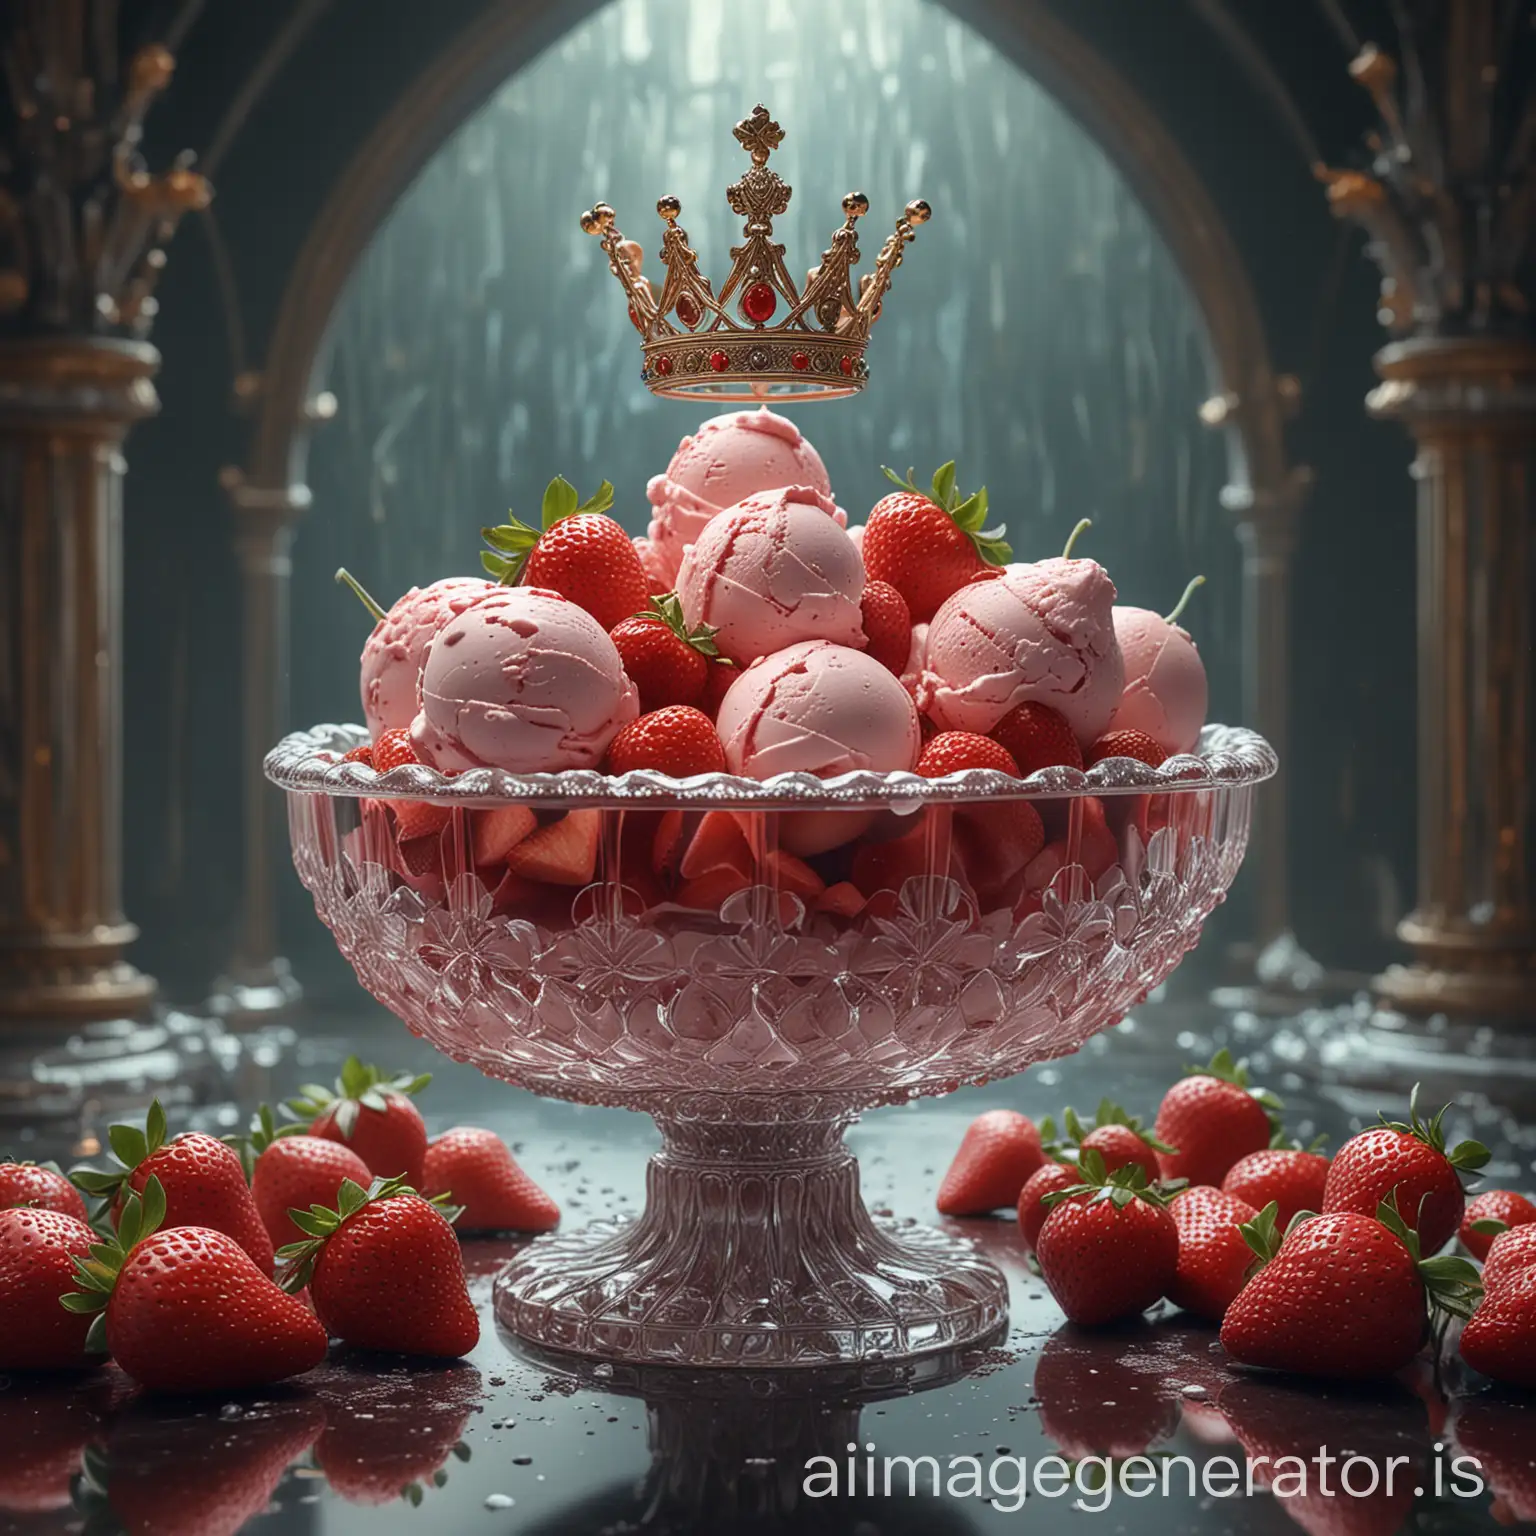 strawberries ice cream in the glass bowl, epic royal background, big royal uncropped crown, royal jewelry, robotic, nature, full shot, symmetrical, Greg Rutkowski, Charlie Bowater, Beeple, Unreal 5, hyperrealistic, dynamic lighting, fantasy art